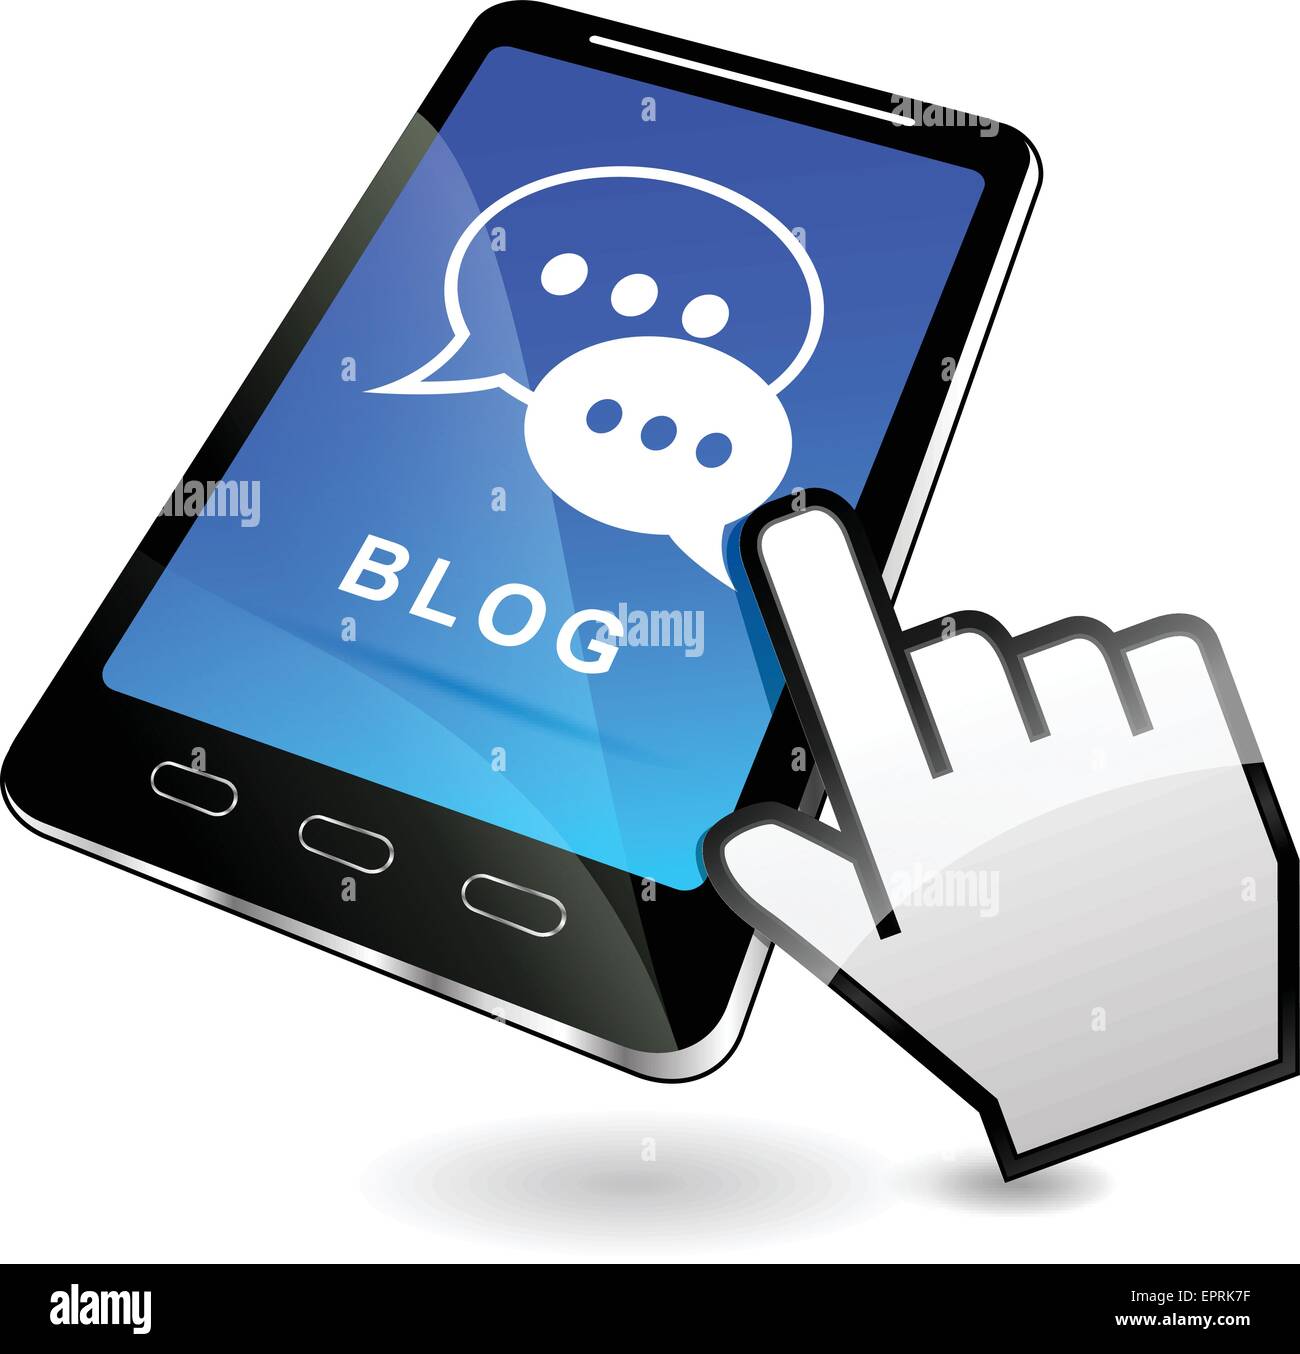 illustration of blog on mobile phone concept Stock Vector